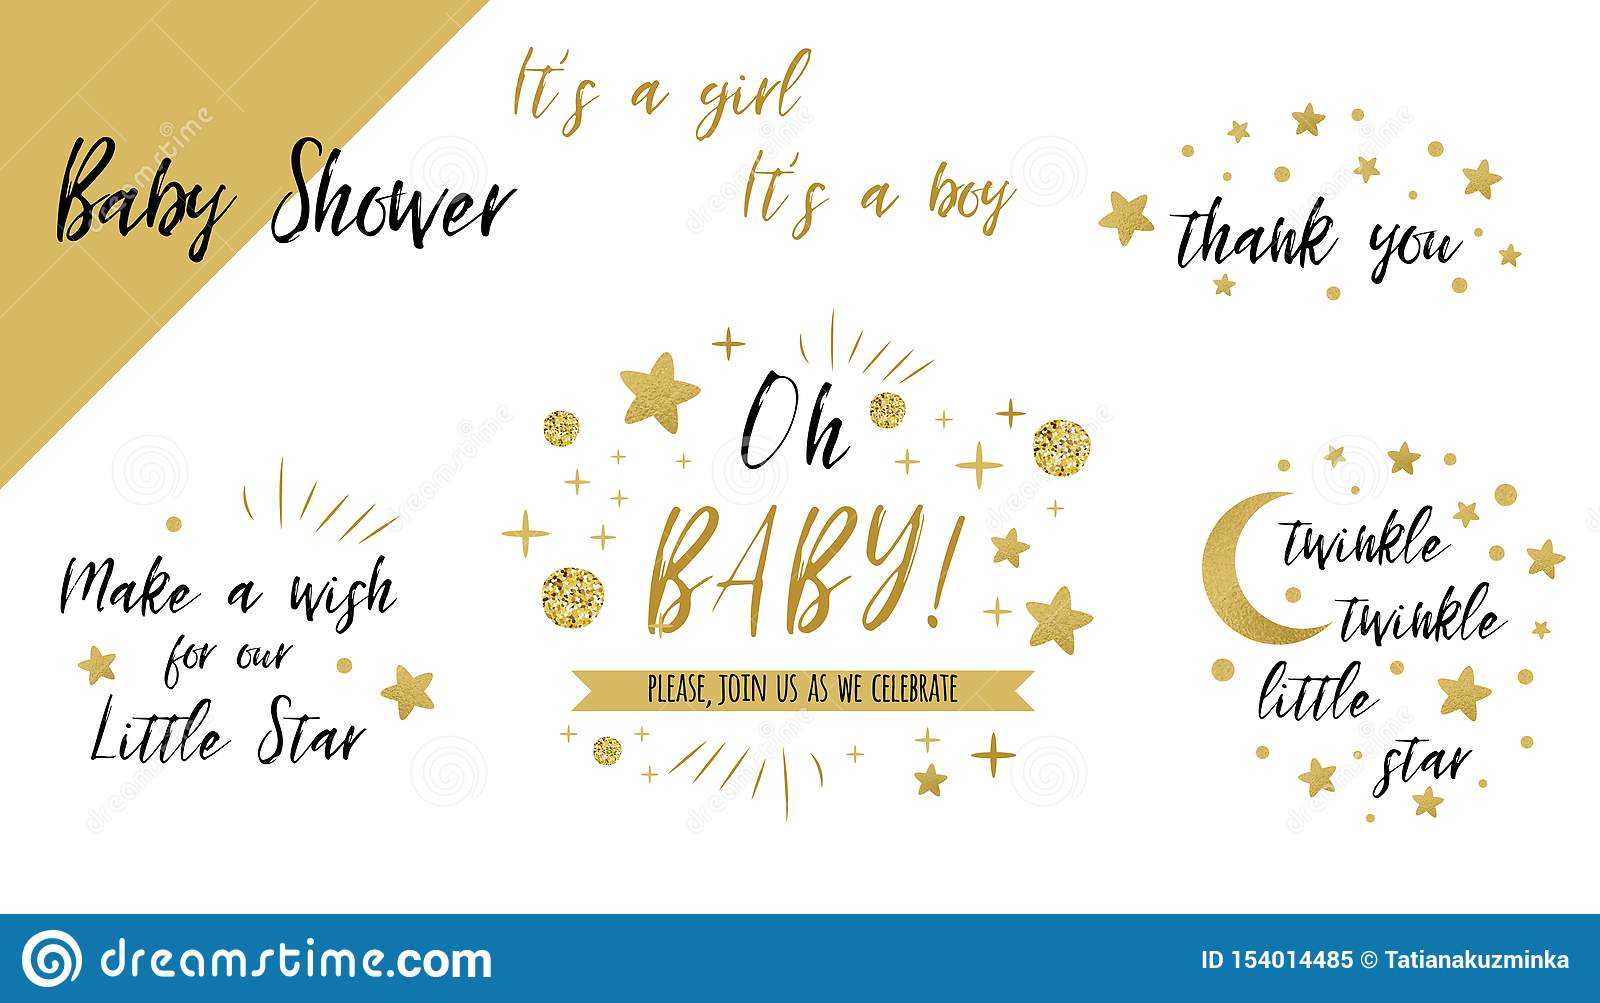 Baby Shower Set Gold Templates Twinkle Twinkle Little Star Within Thank You Card Template For Baby Shower